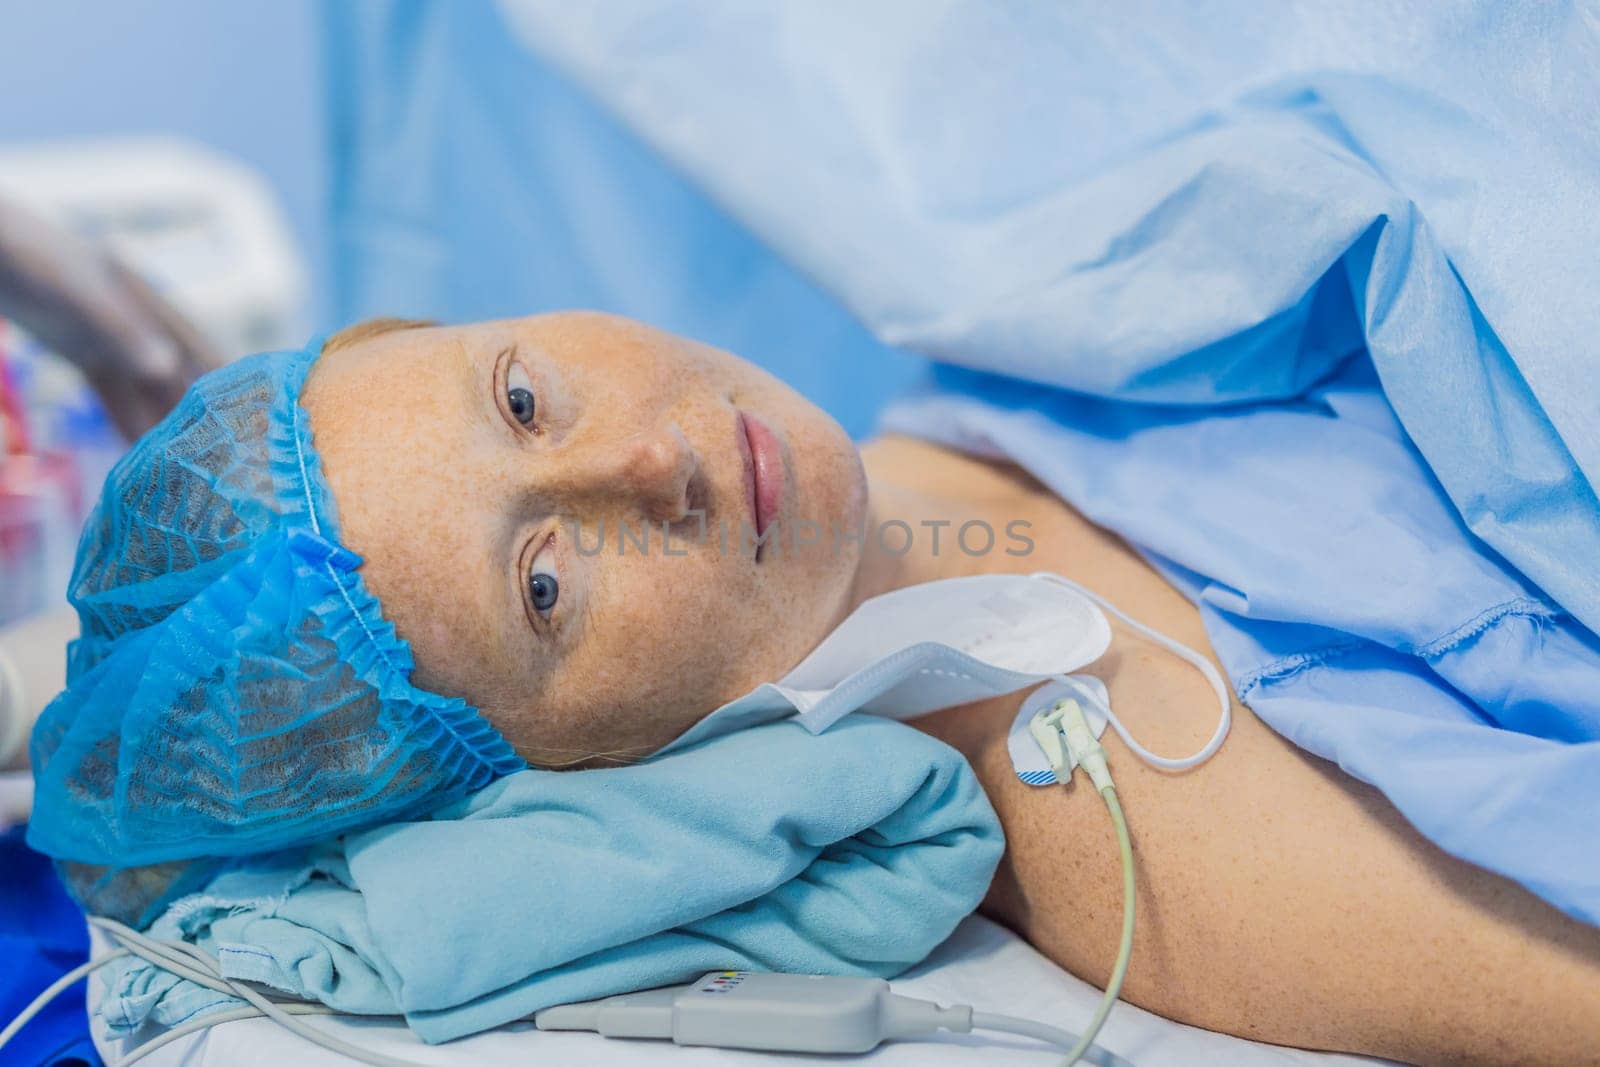 A woman lies in the operating room, ready for surgery. Surrounded by advanced medical equipment and healthcare professionals, she exhibits calmness and trust, highlighting the importance of the procedure by galitskaya